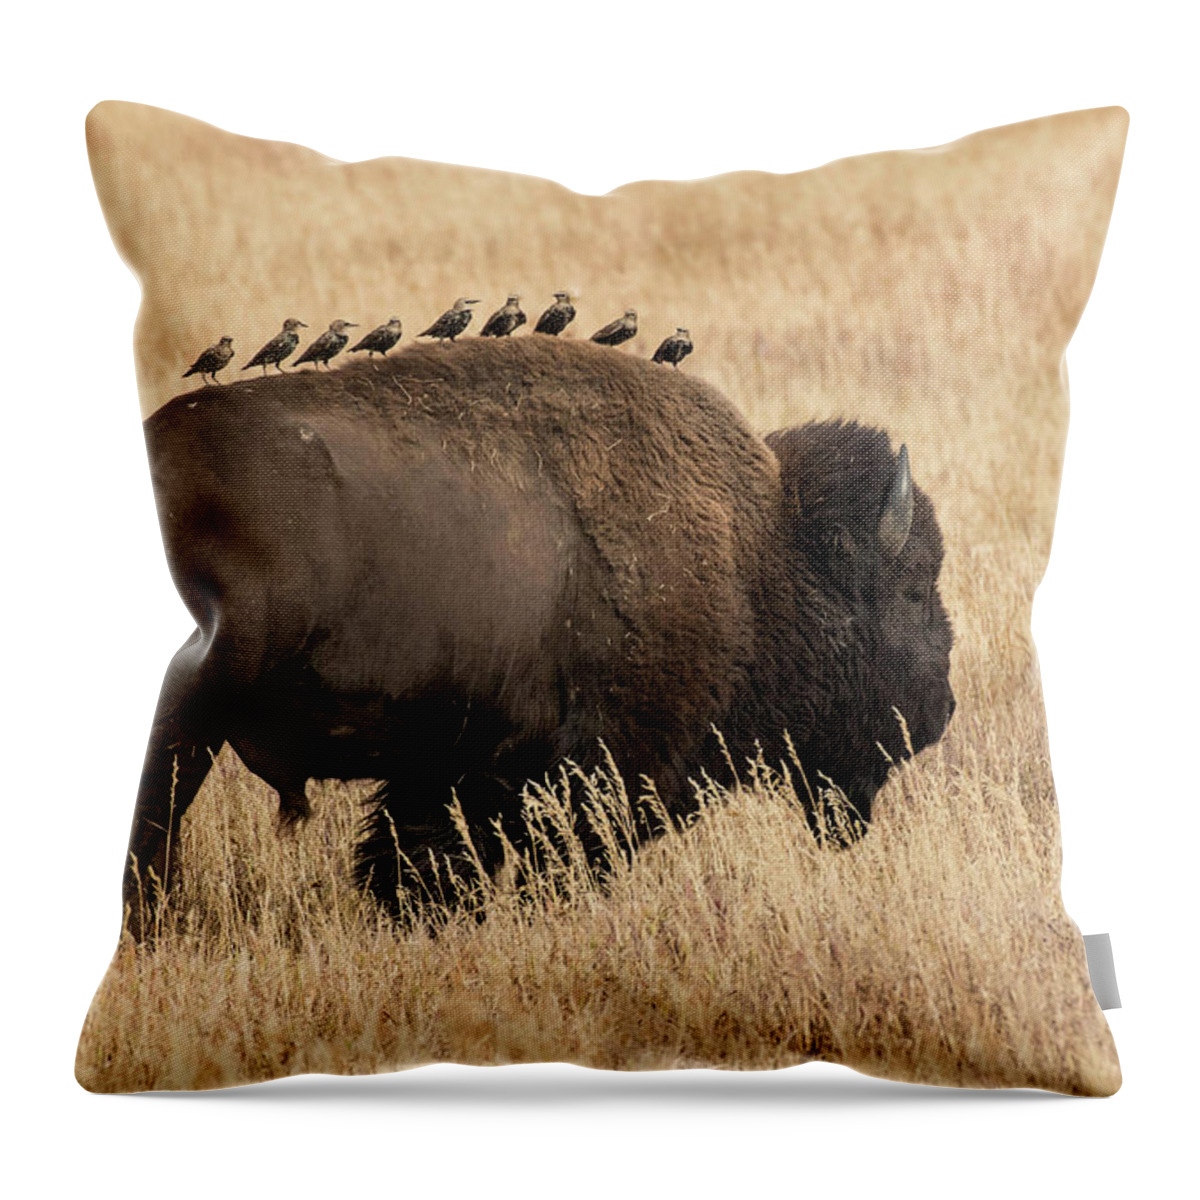 Animals Throw Pillow featuring the photograph Bison Uber by Linda Shannon Morgan